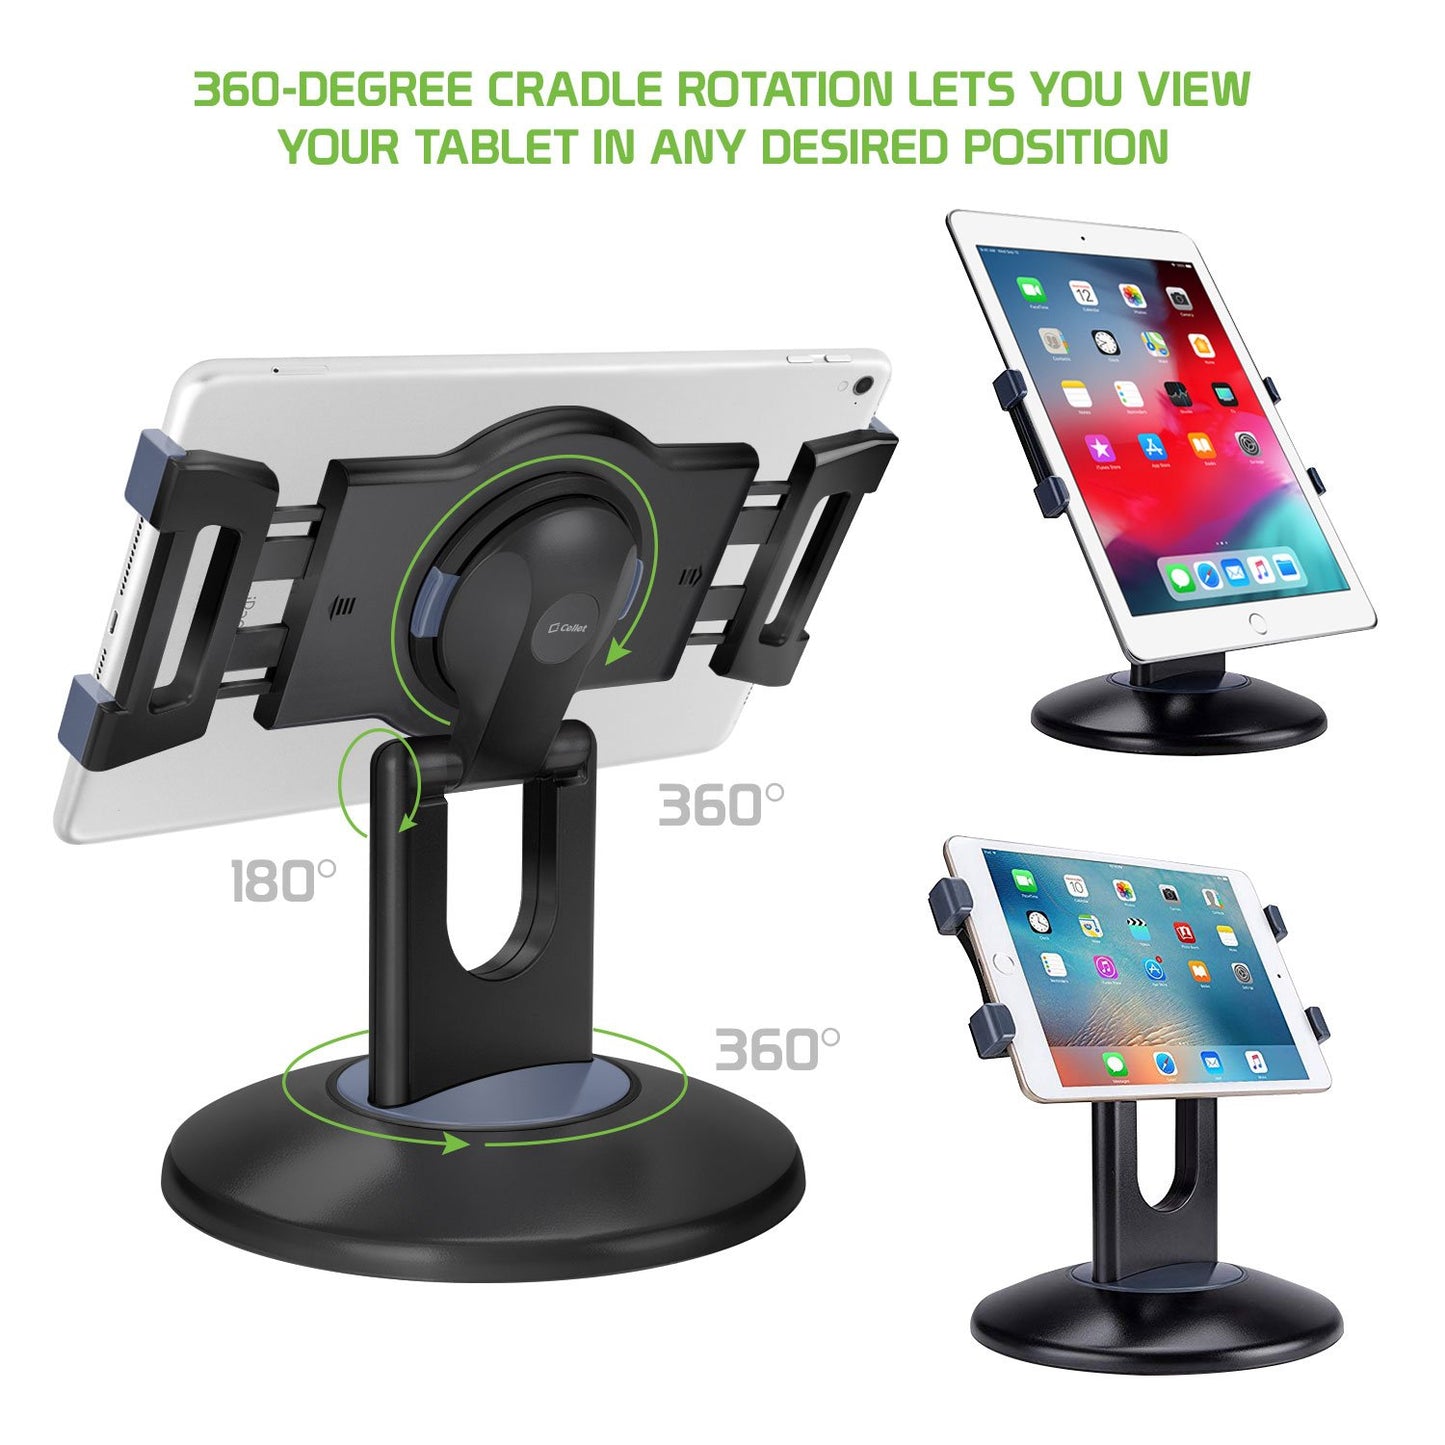 PHTAB5003 - 3-in-1 Tablet Holder Combo, Heavy Duty Desktop, Portable Stand and Headrest Holder with 360 Degree Rotation for iPads and Tablets